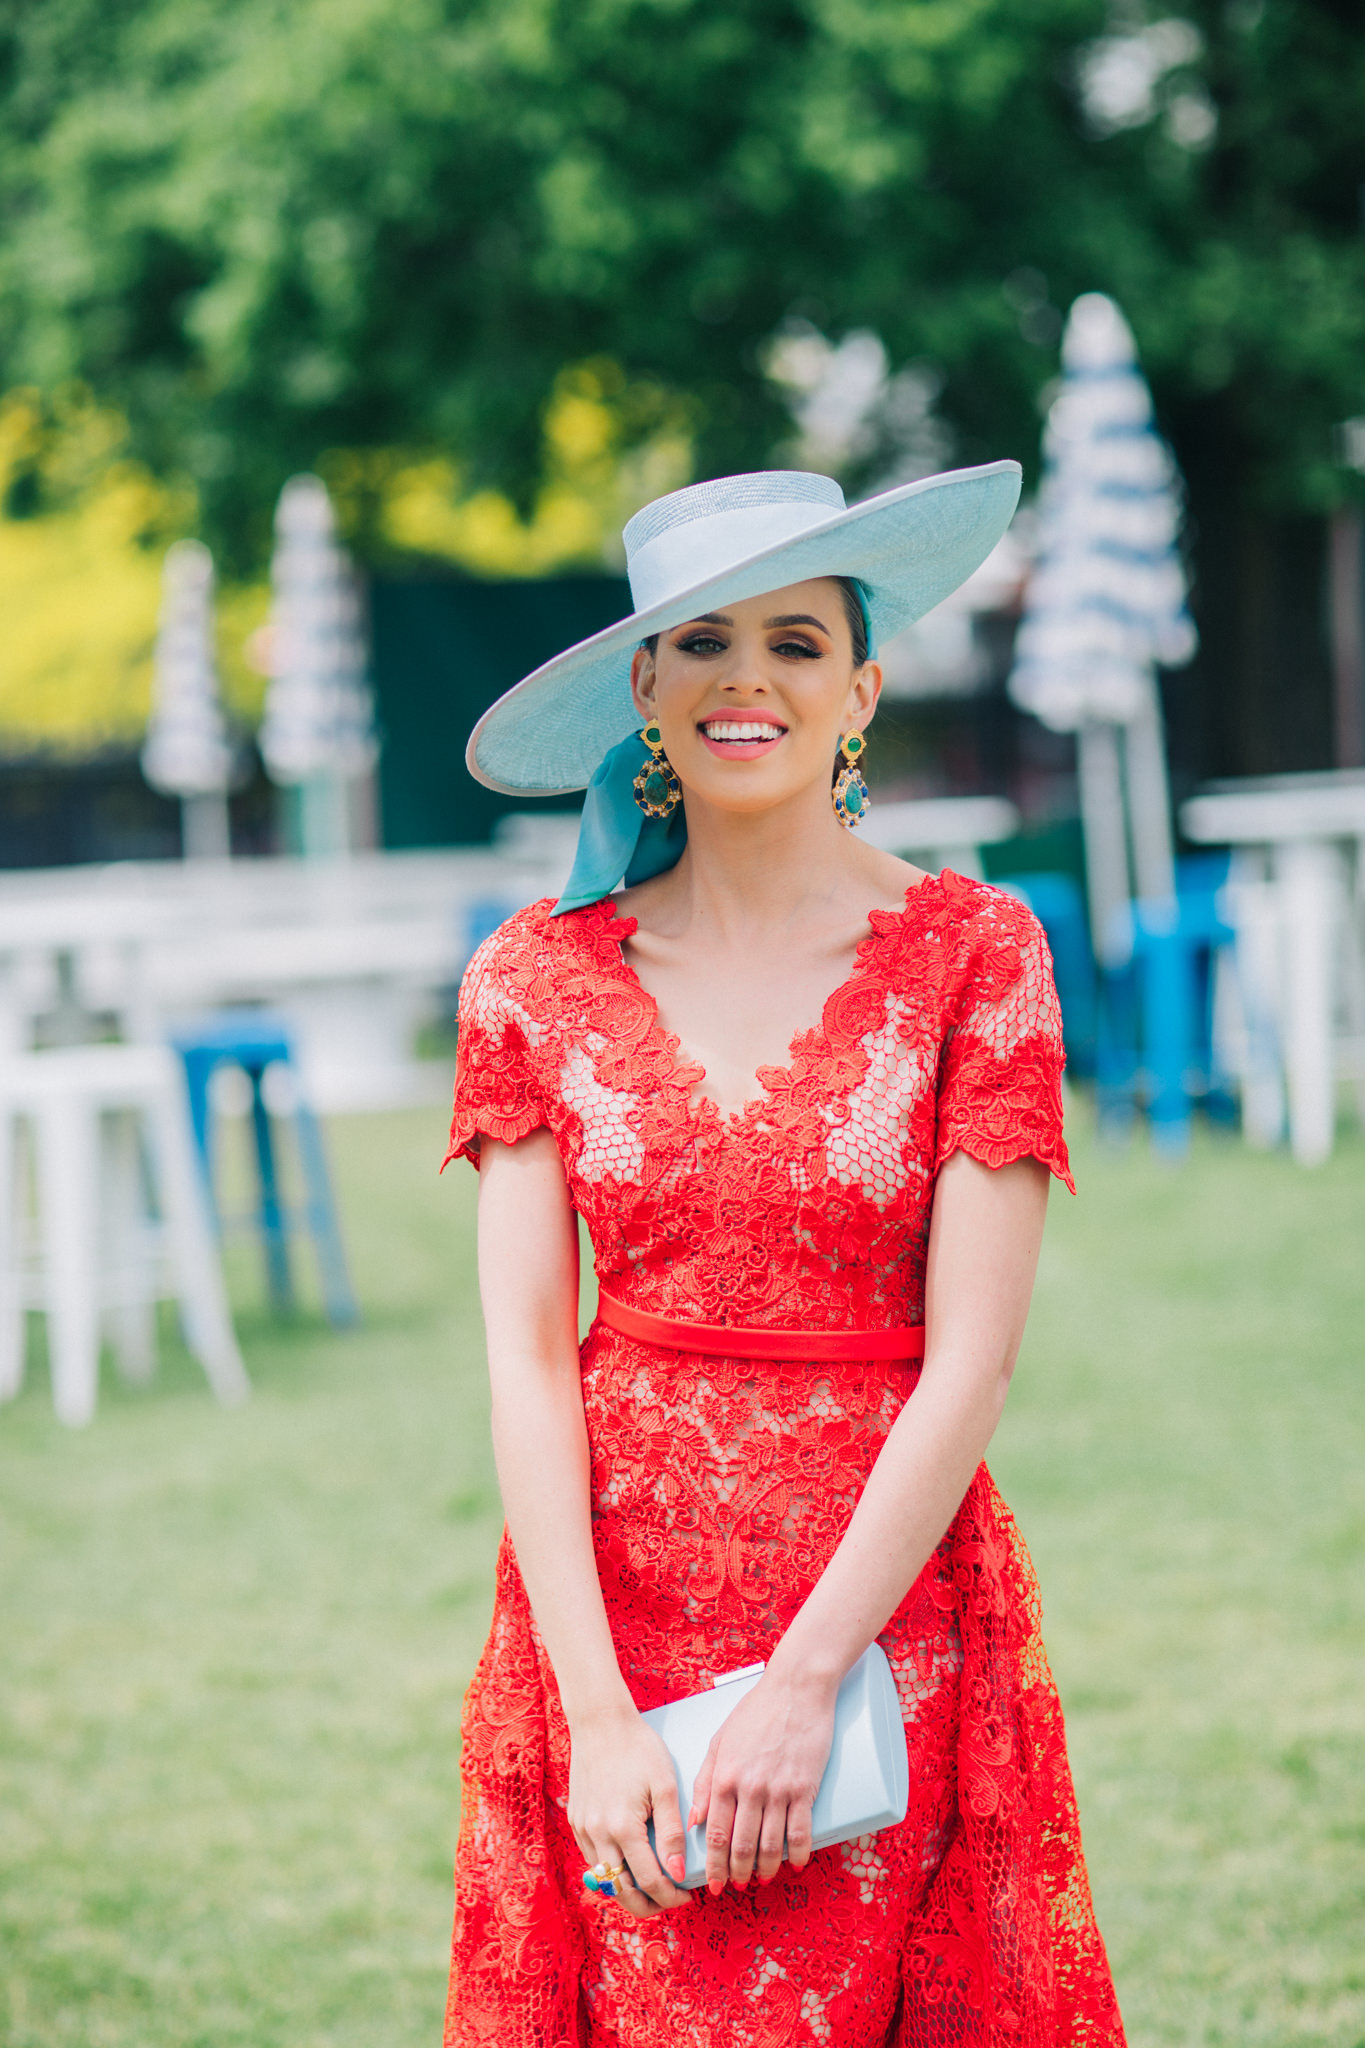 Fashion Winners - Melbourne Cup - Spring Racing Carnival Fashions